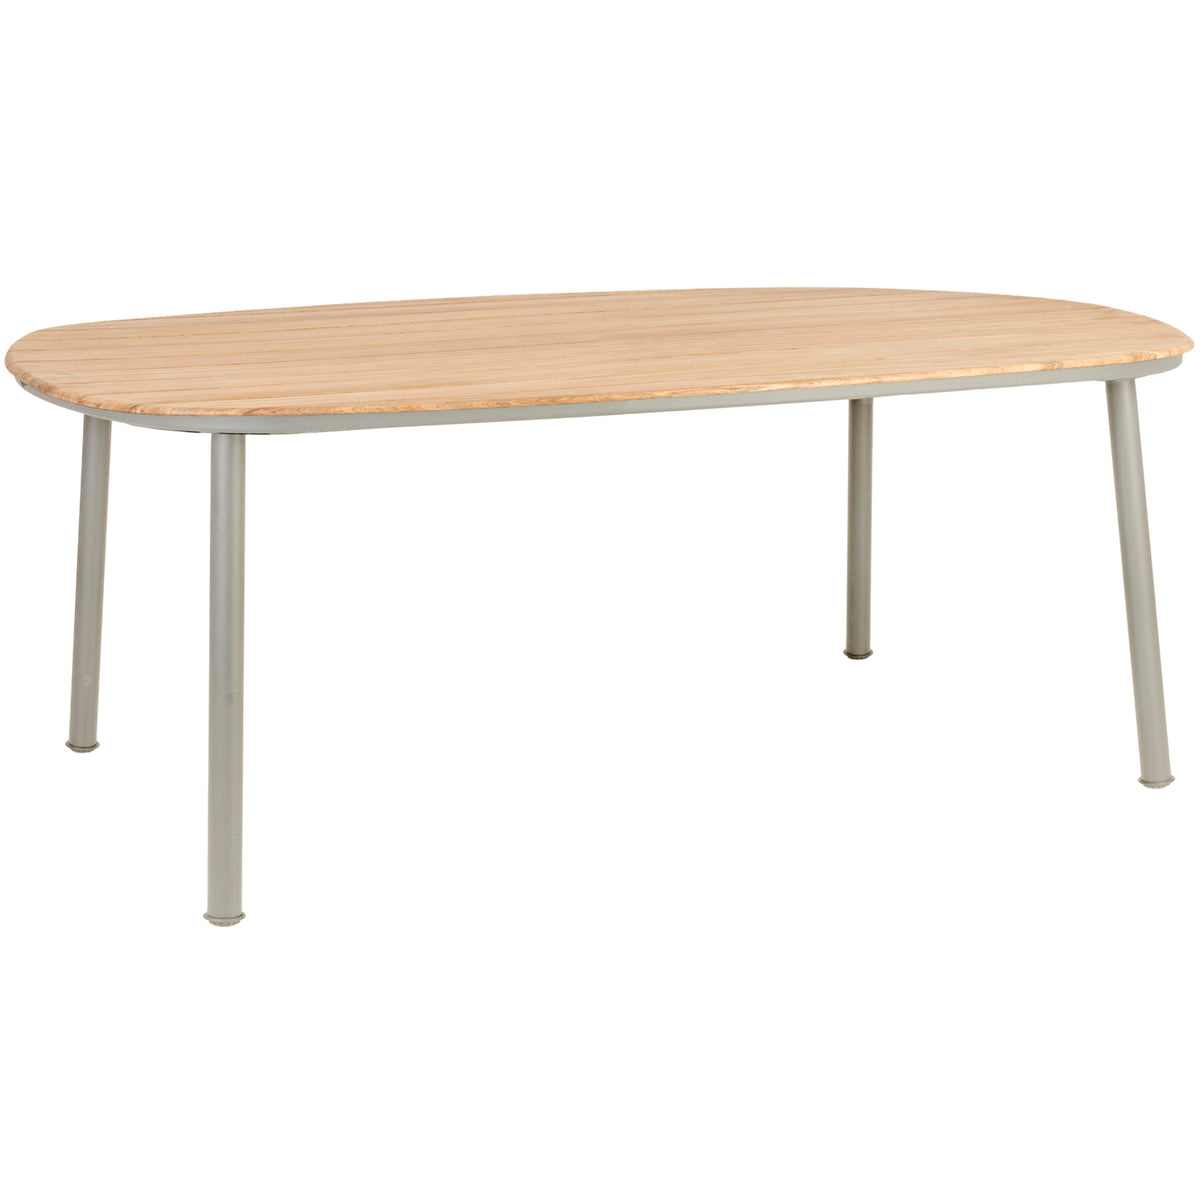 Alexander Rose Cordial Beige Shaped Dining Table with Roble Top (2m x 1.2m)